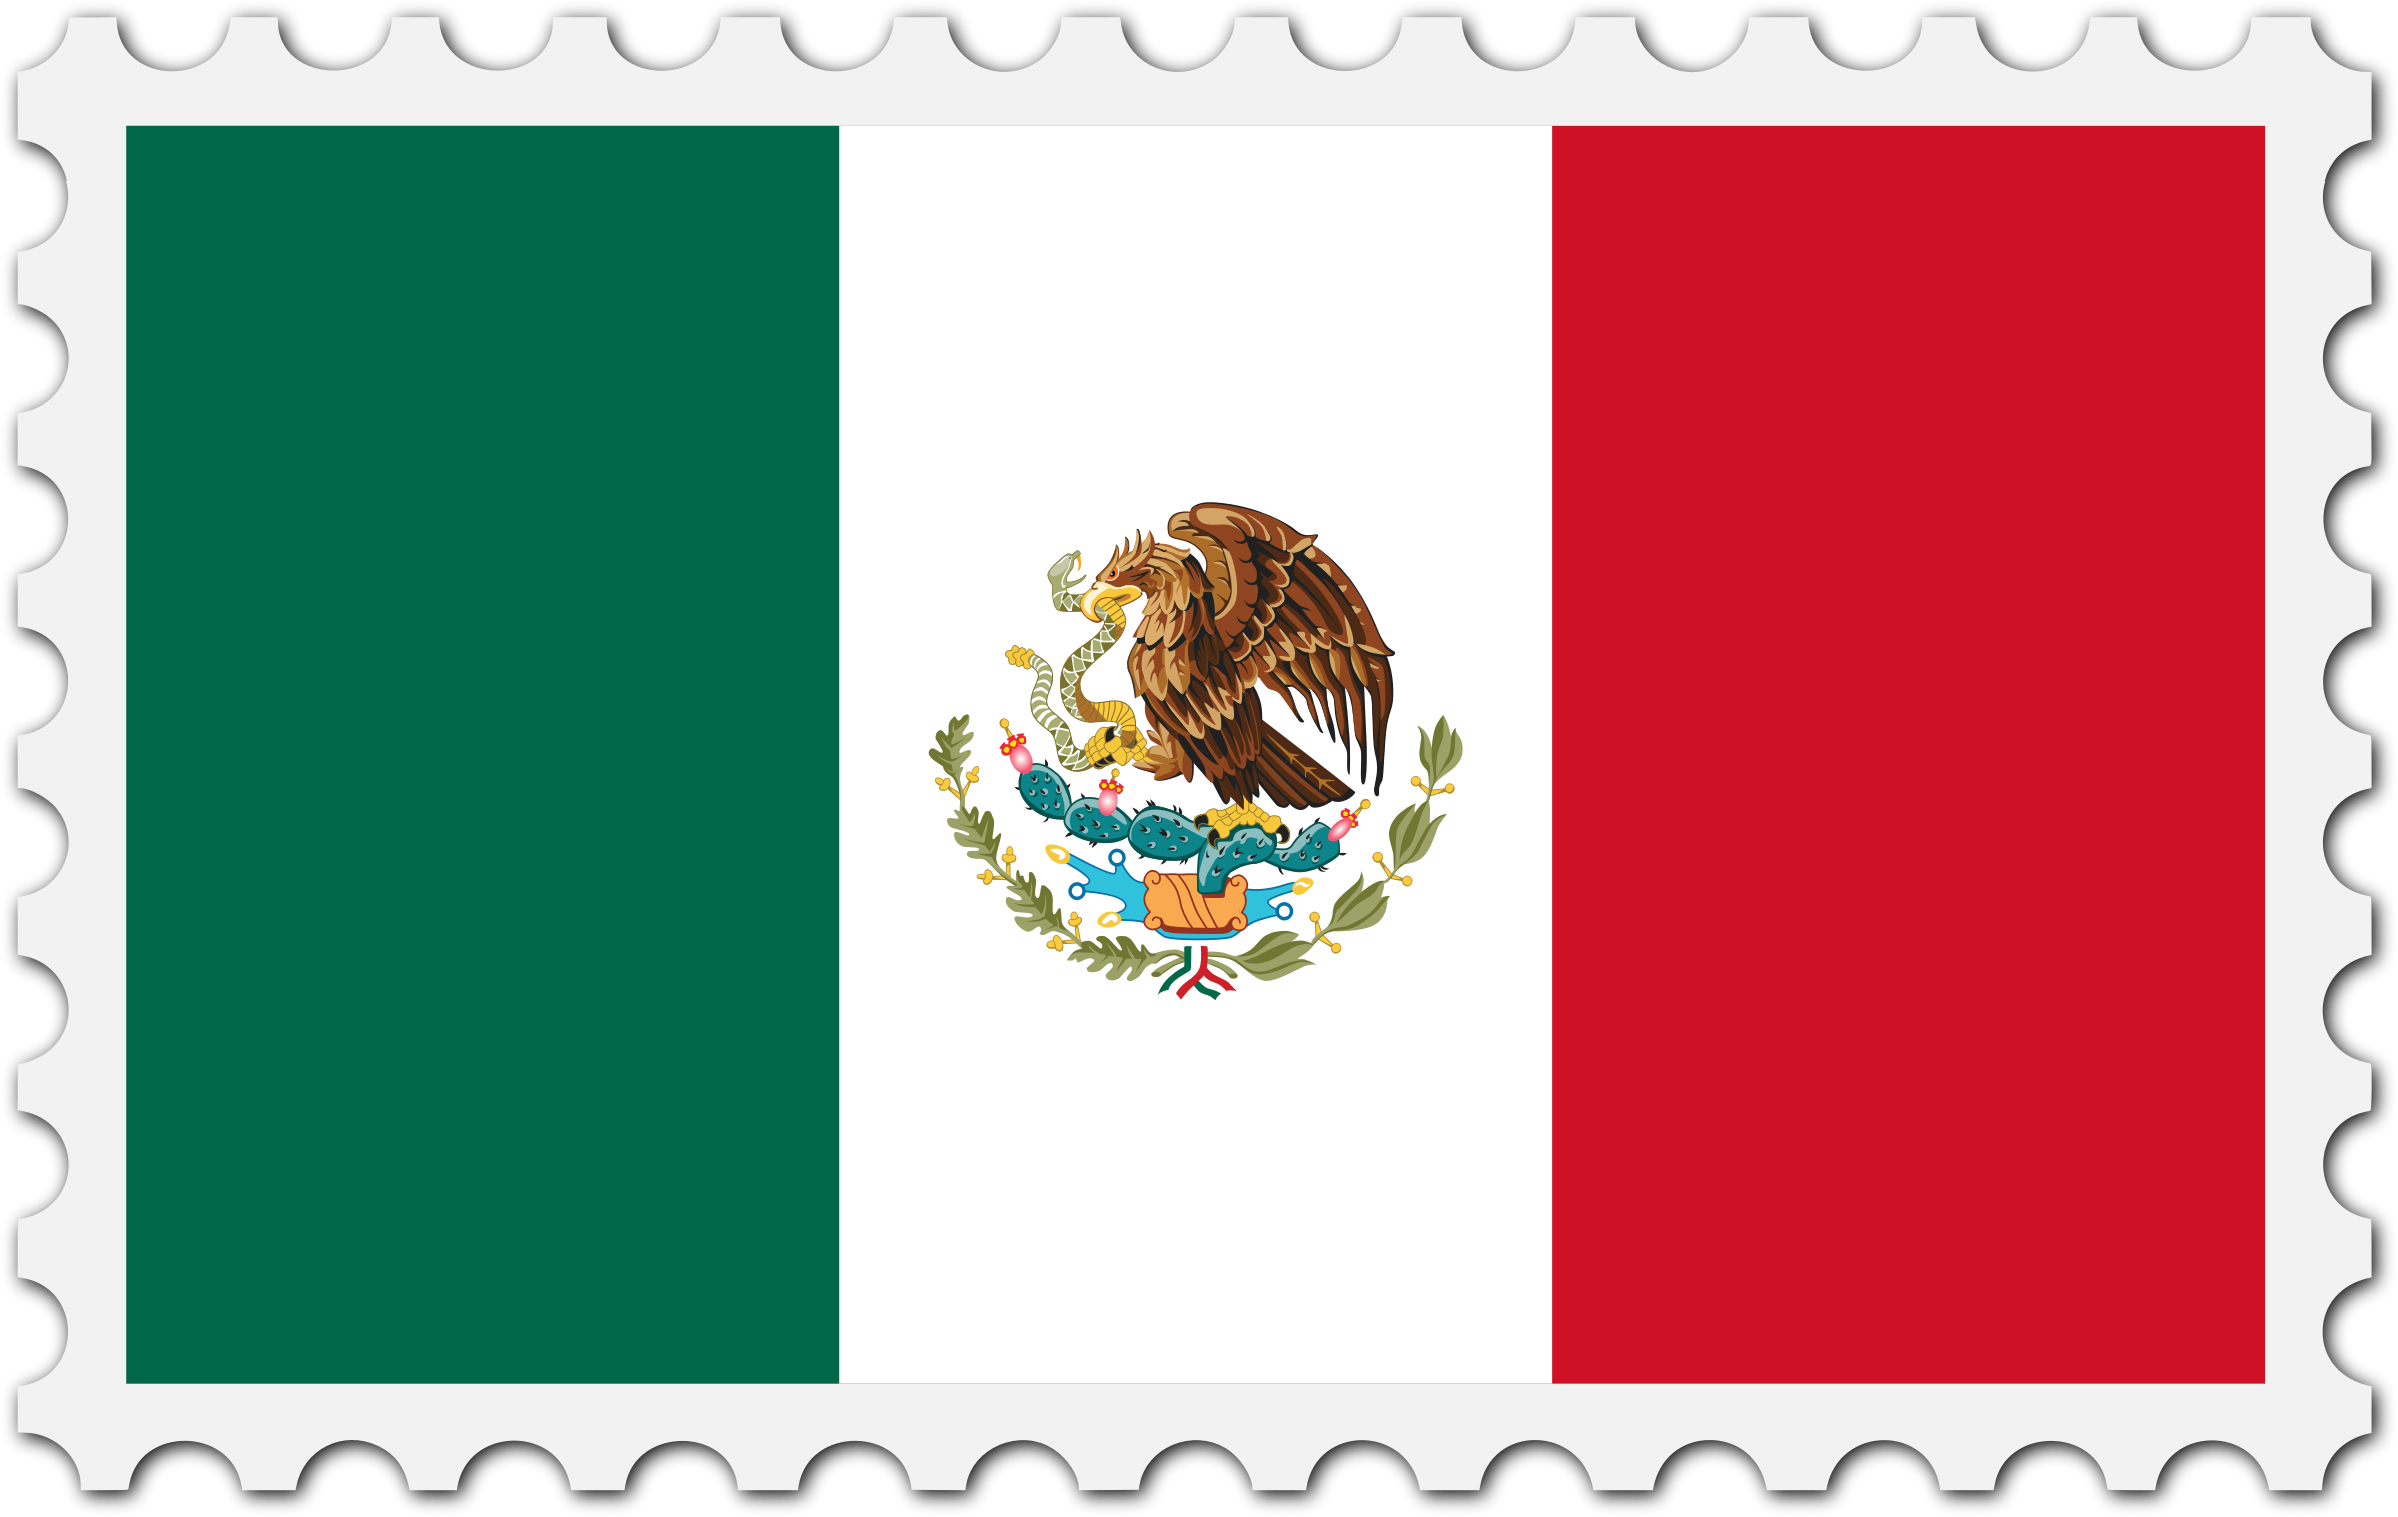 Flag Of Mexico Bandera De Mexico Mexican Flag United States Of